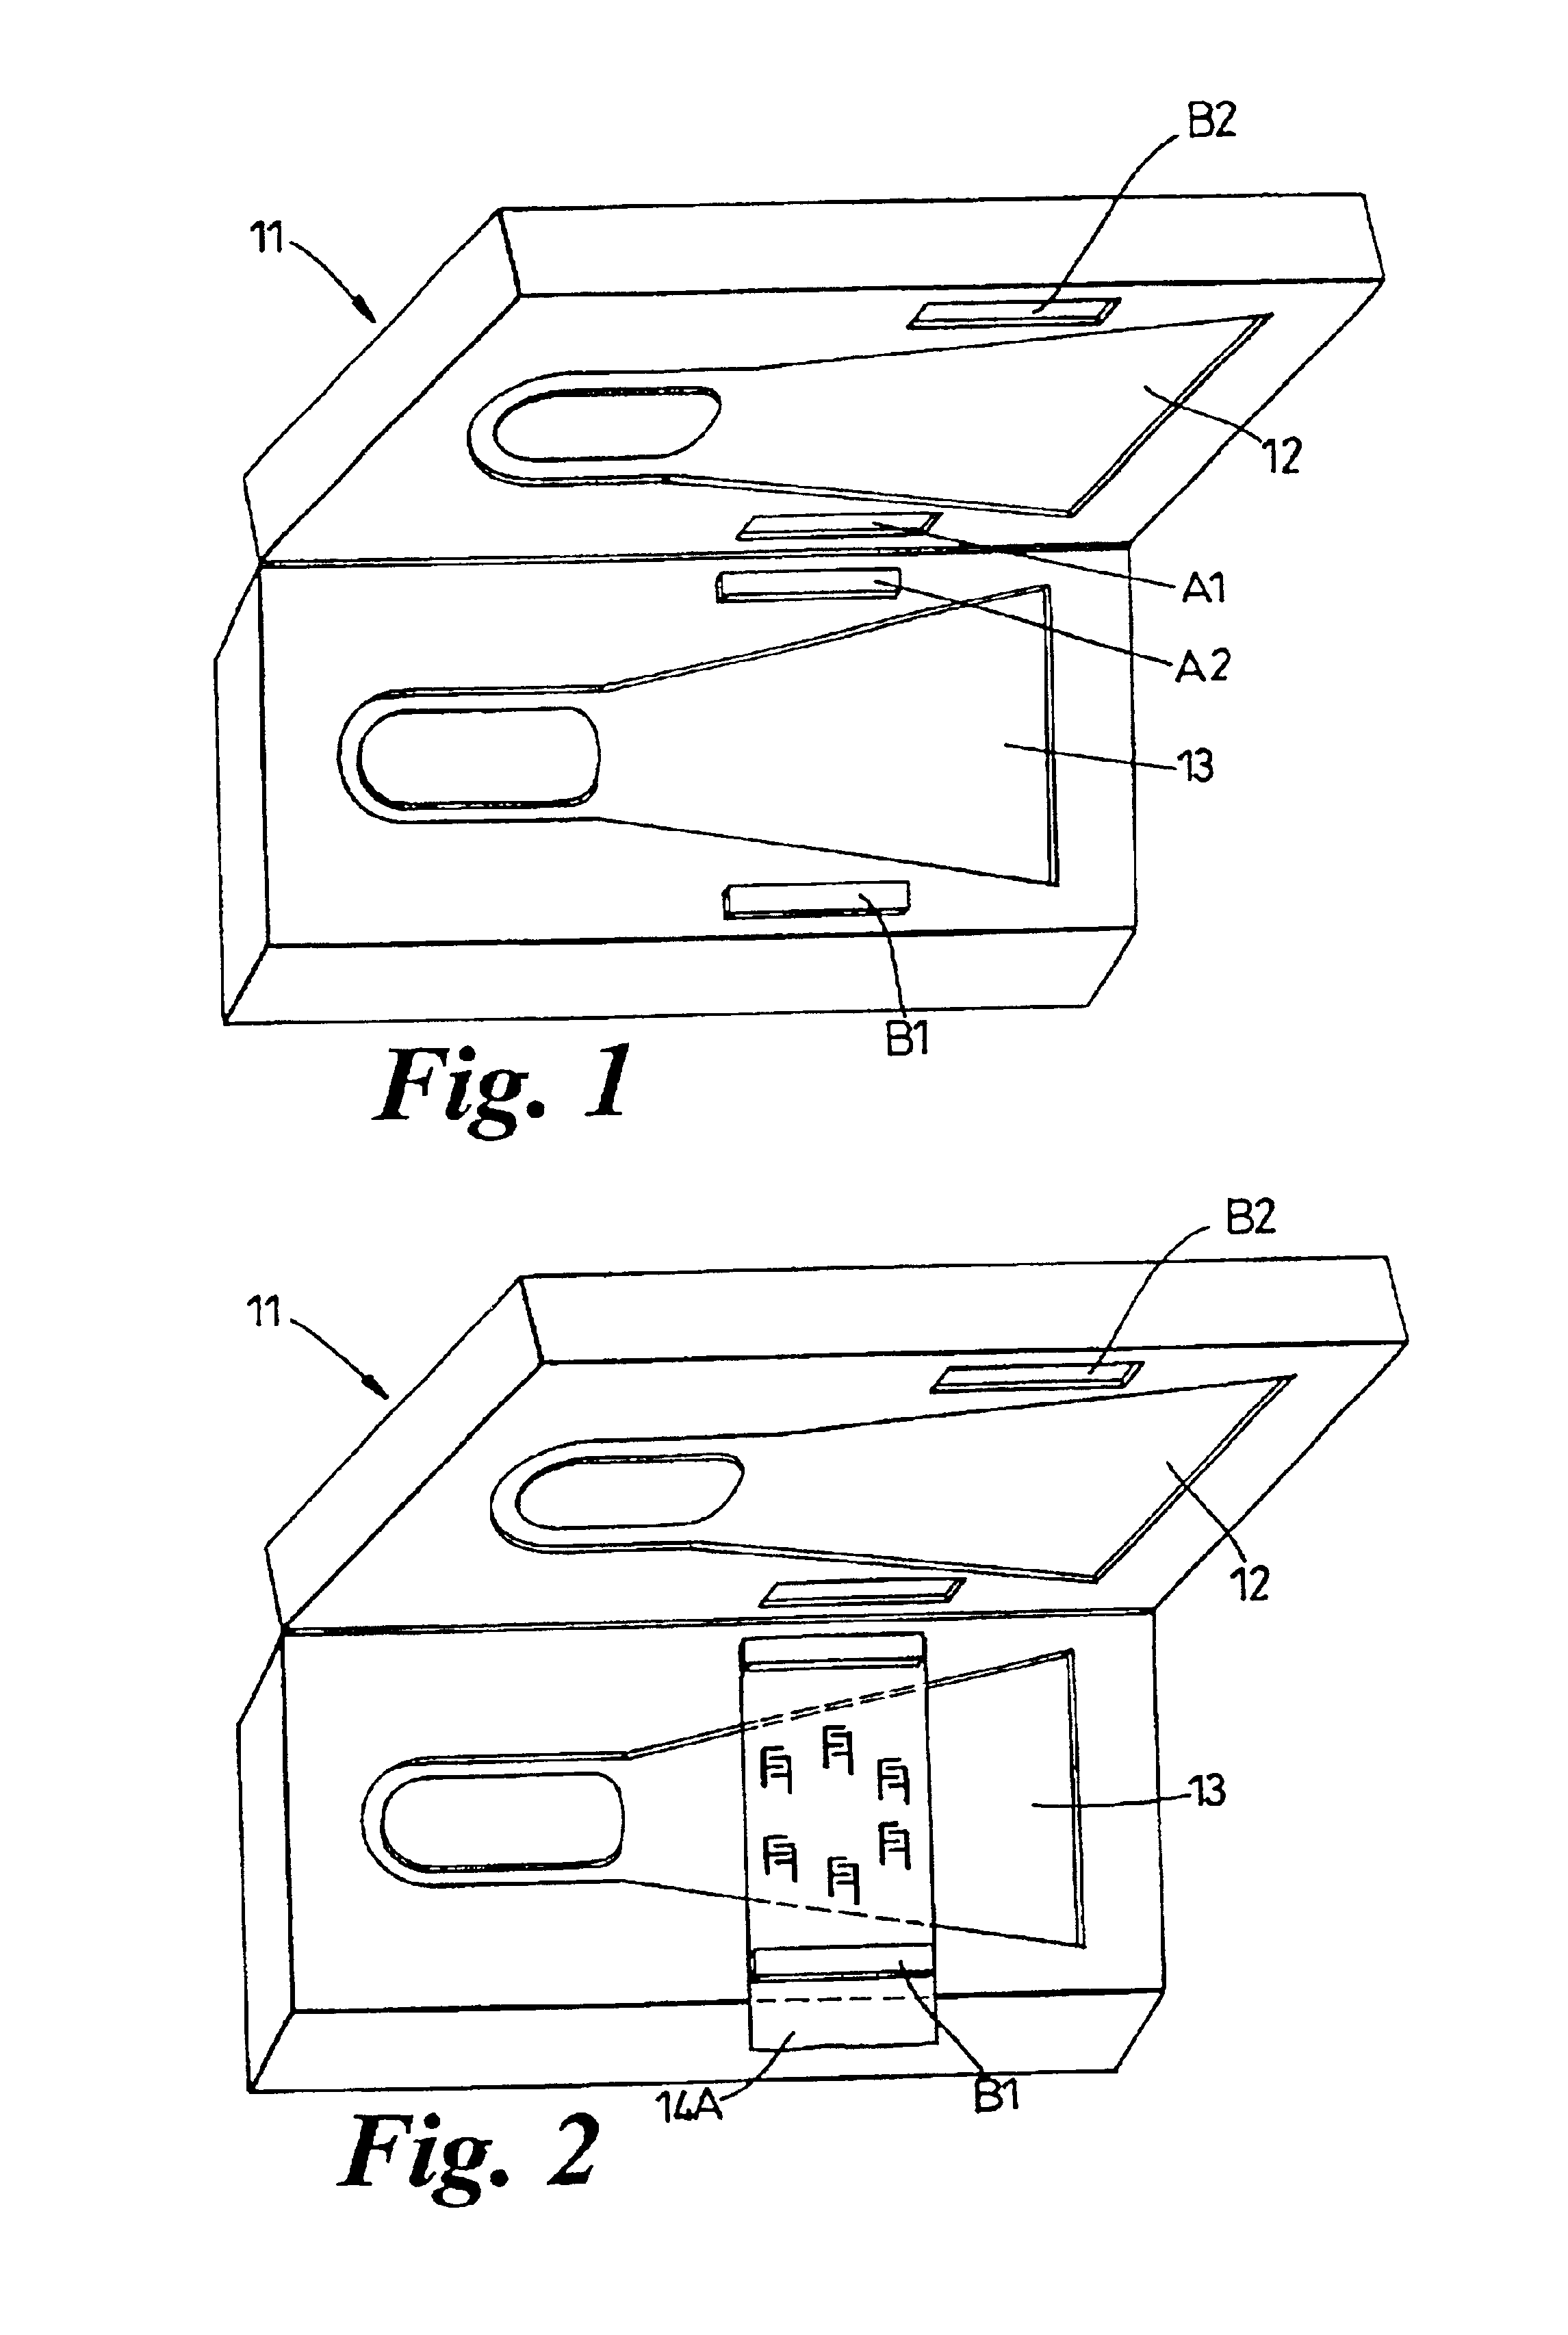 Method of manufacturing a moulded article and a product of the method